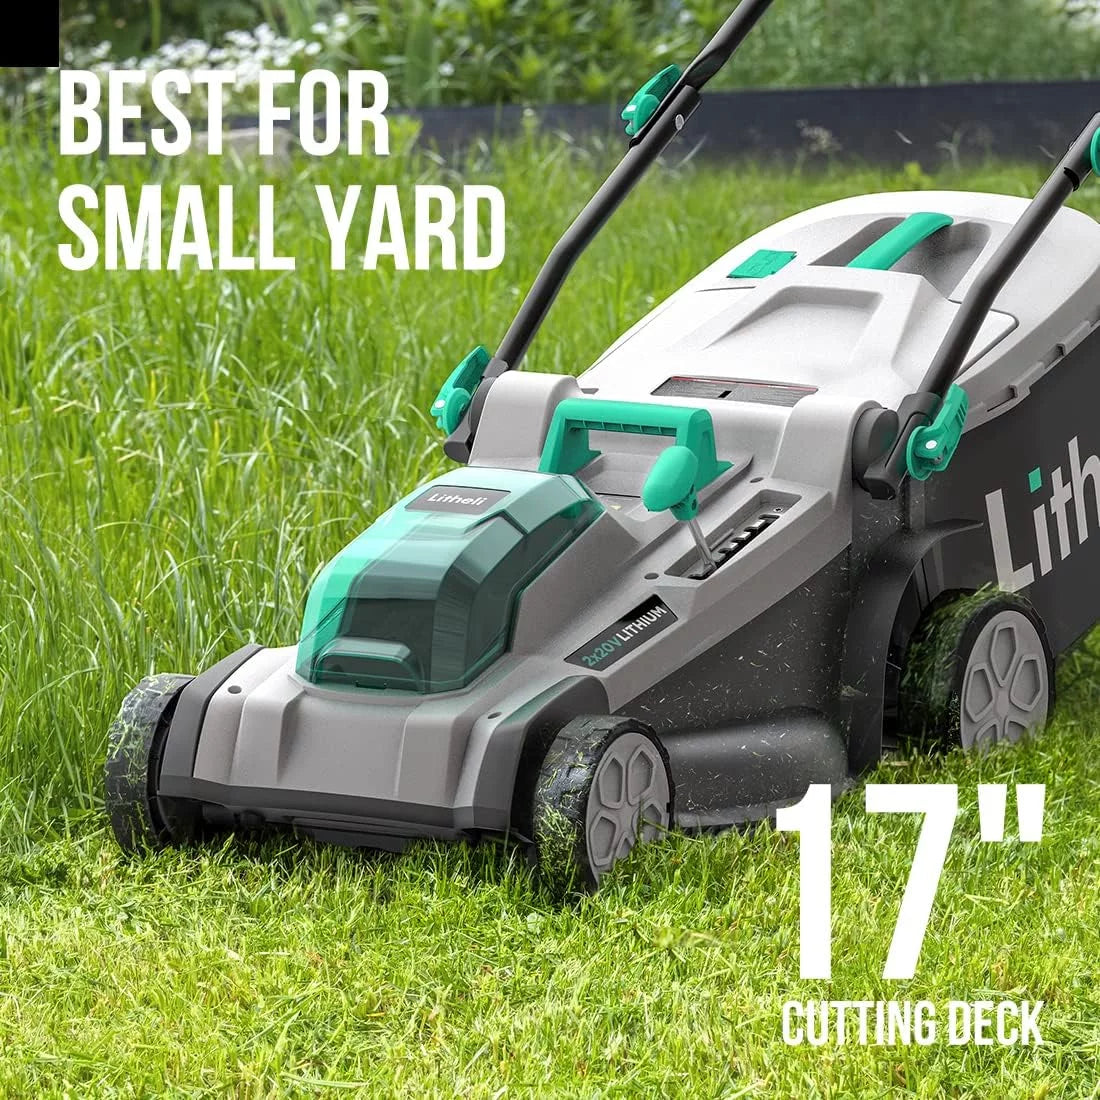 Litheli 2*20V 17" Cordless Lawn Mower with Brushless Motor + 2*4.0Ah Battery & Charger